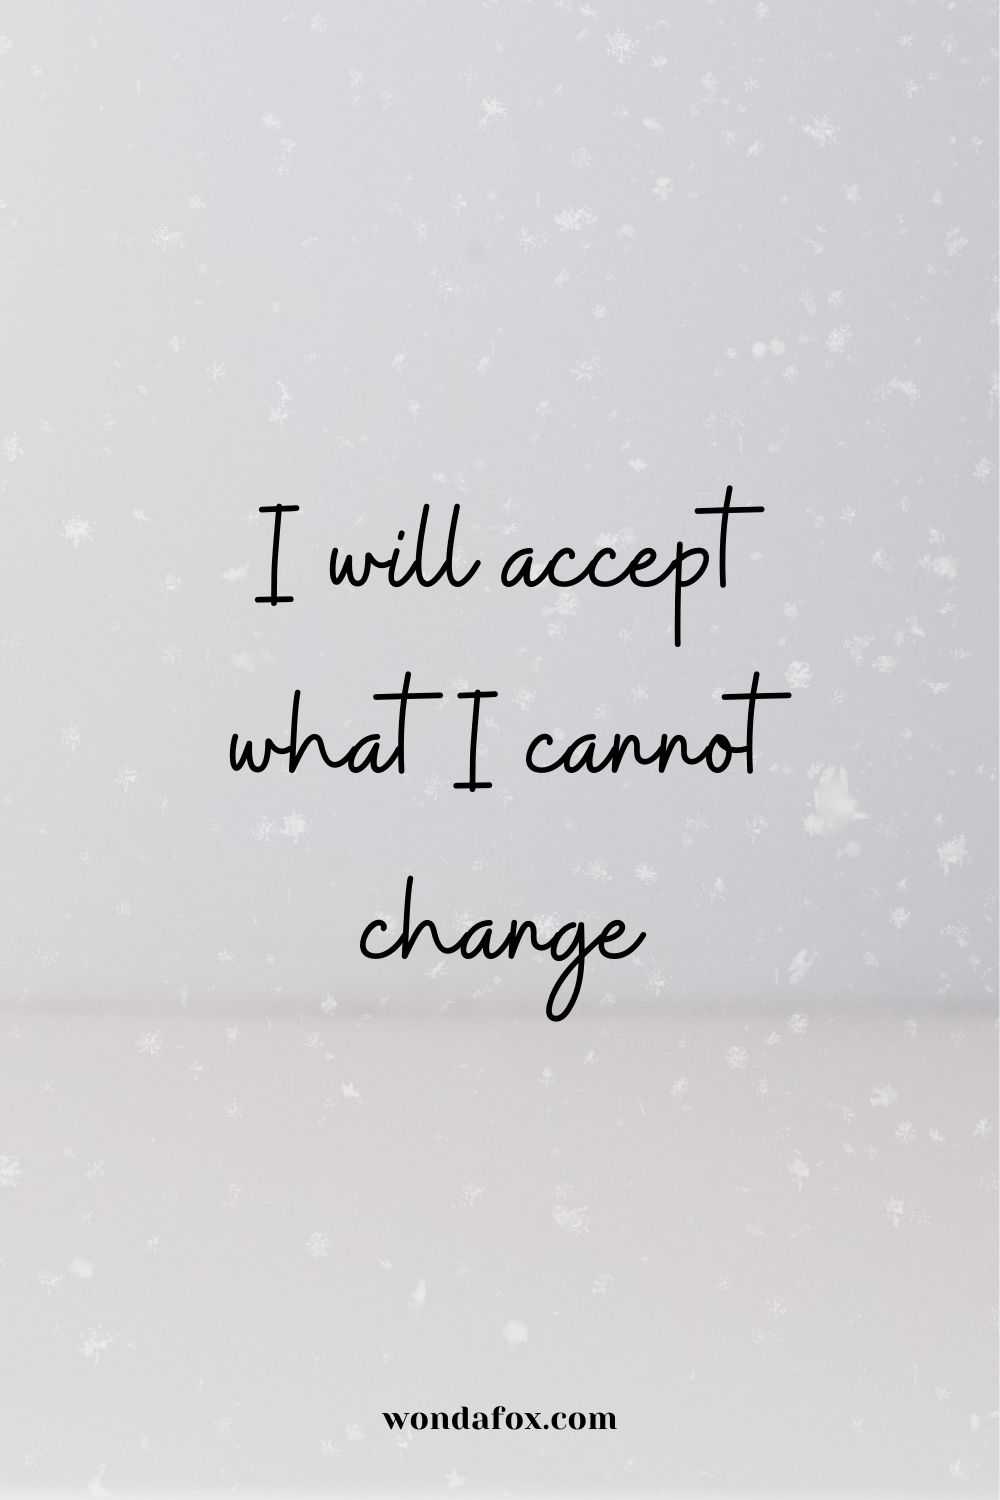 I will accept what I cannot change